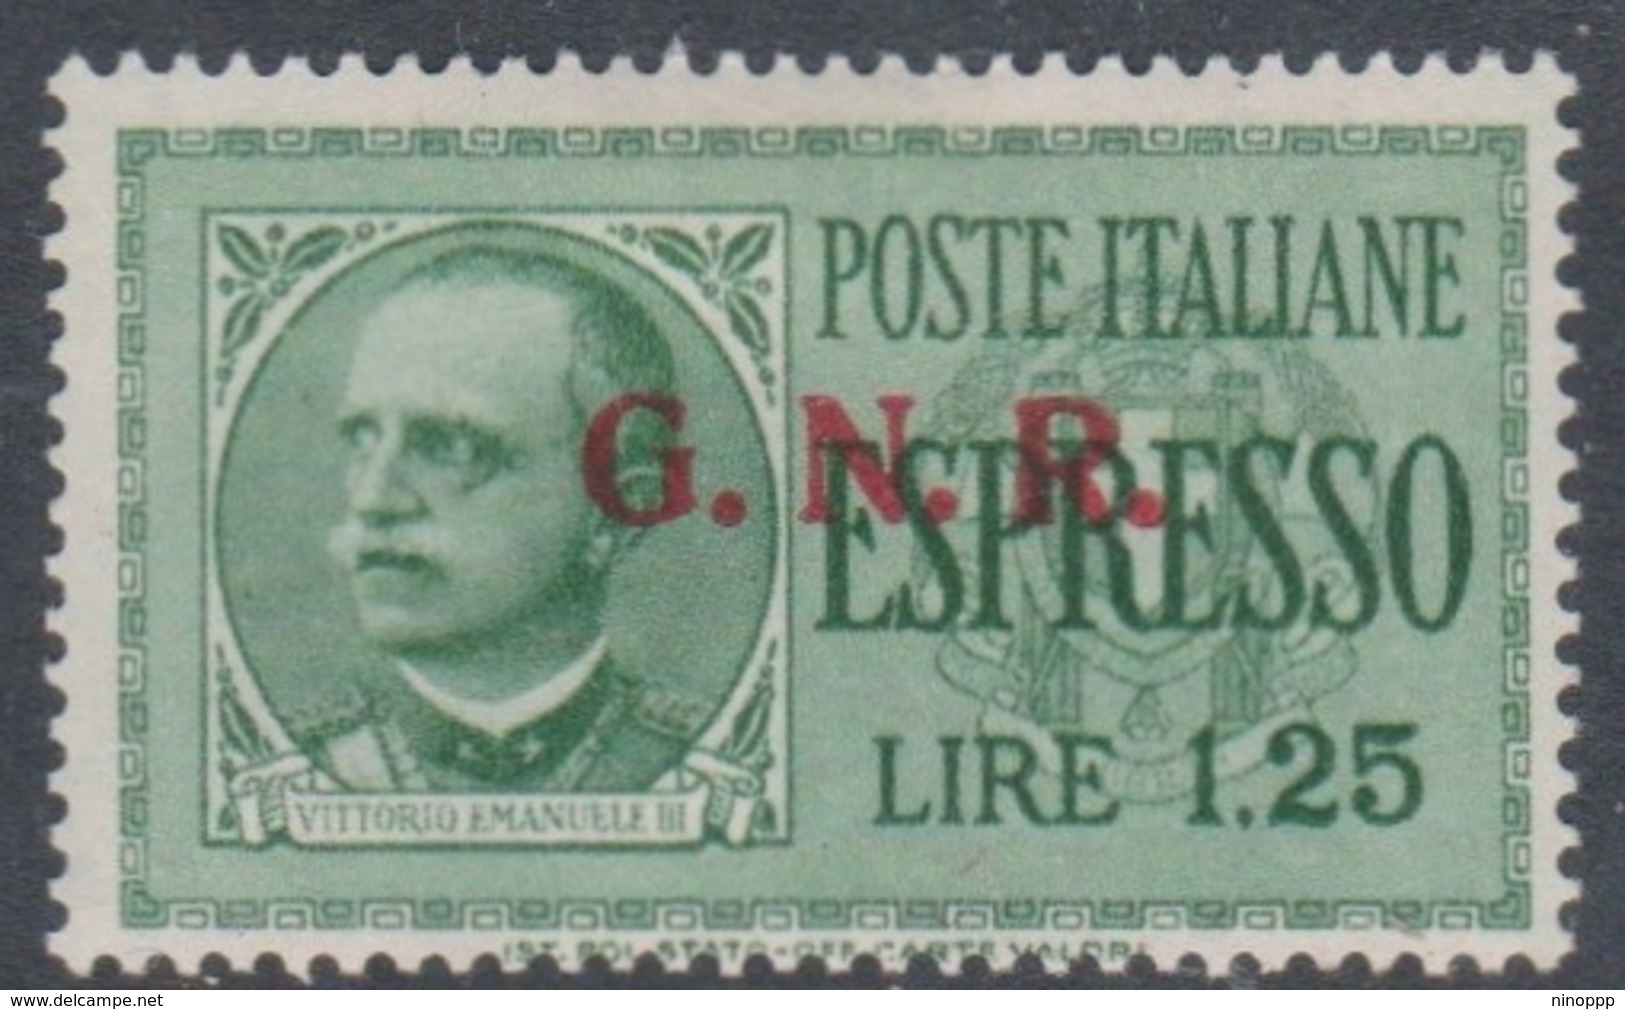 Italy-Italian Social Republic E 19 1943 Special Delivery Stamp,1.25 Lire Green, Mint Hinged - Mint/hinged